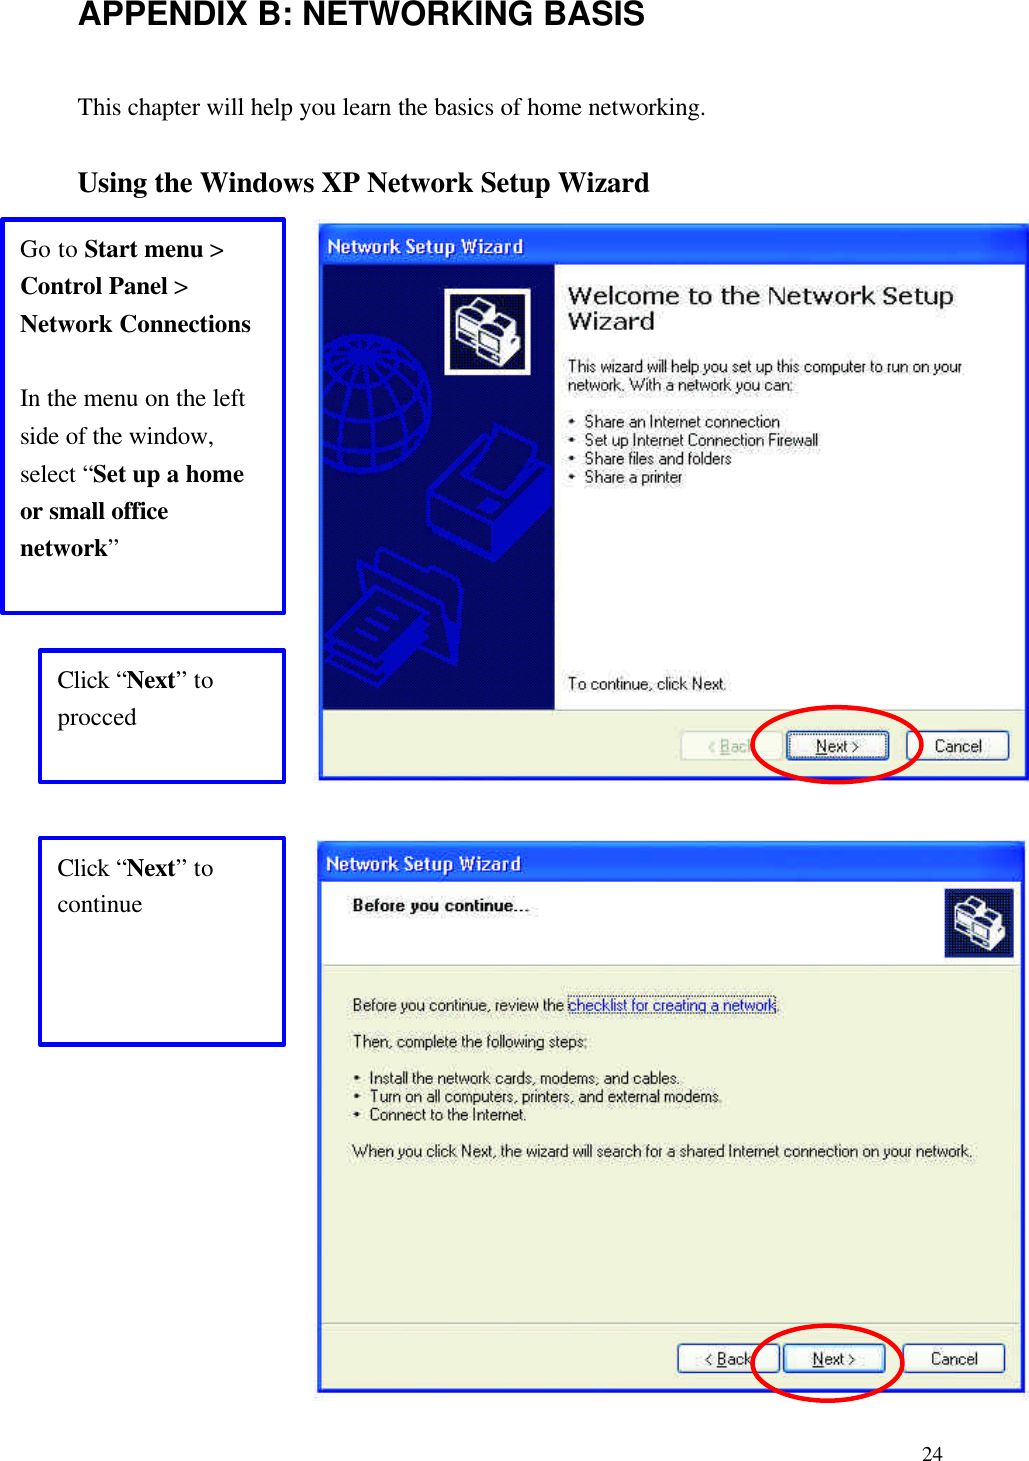  24APPENDIX B: NETWORKING BASIS This chapter will help you learn the basics of home networking.  Using the Windows XP Network Setup Wizard                                Go to Start menu &gt; Control Panel &gt; Network Connections  In the menu on the left side of the window, select “Set up a home or small office network” Click “Next” to procced Click “Next” to continue 